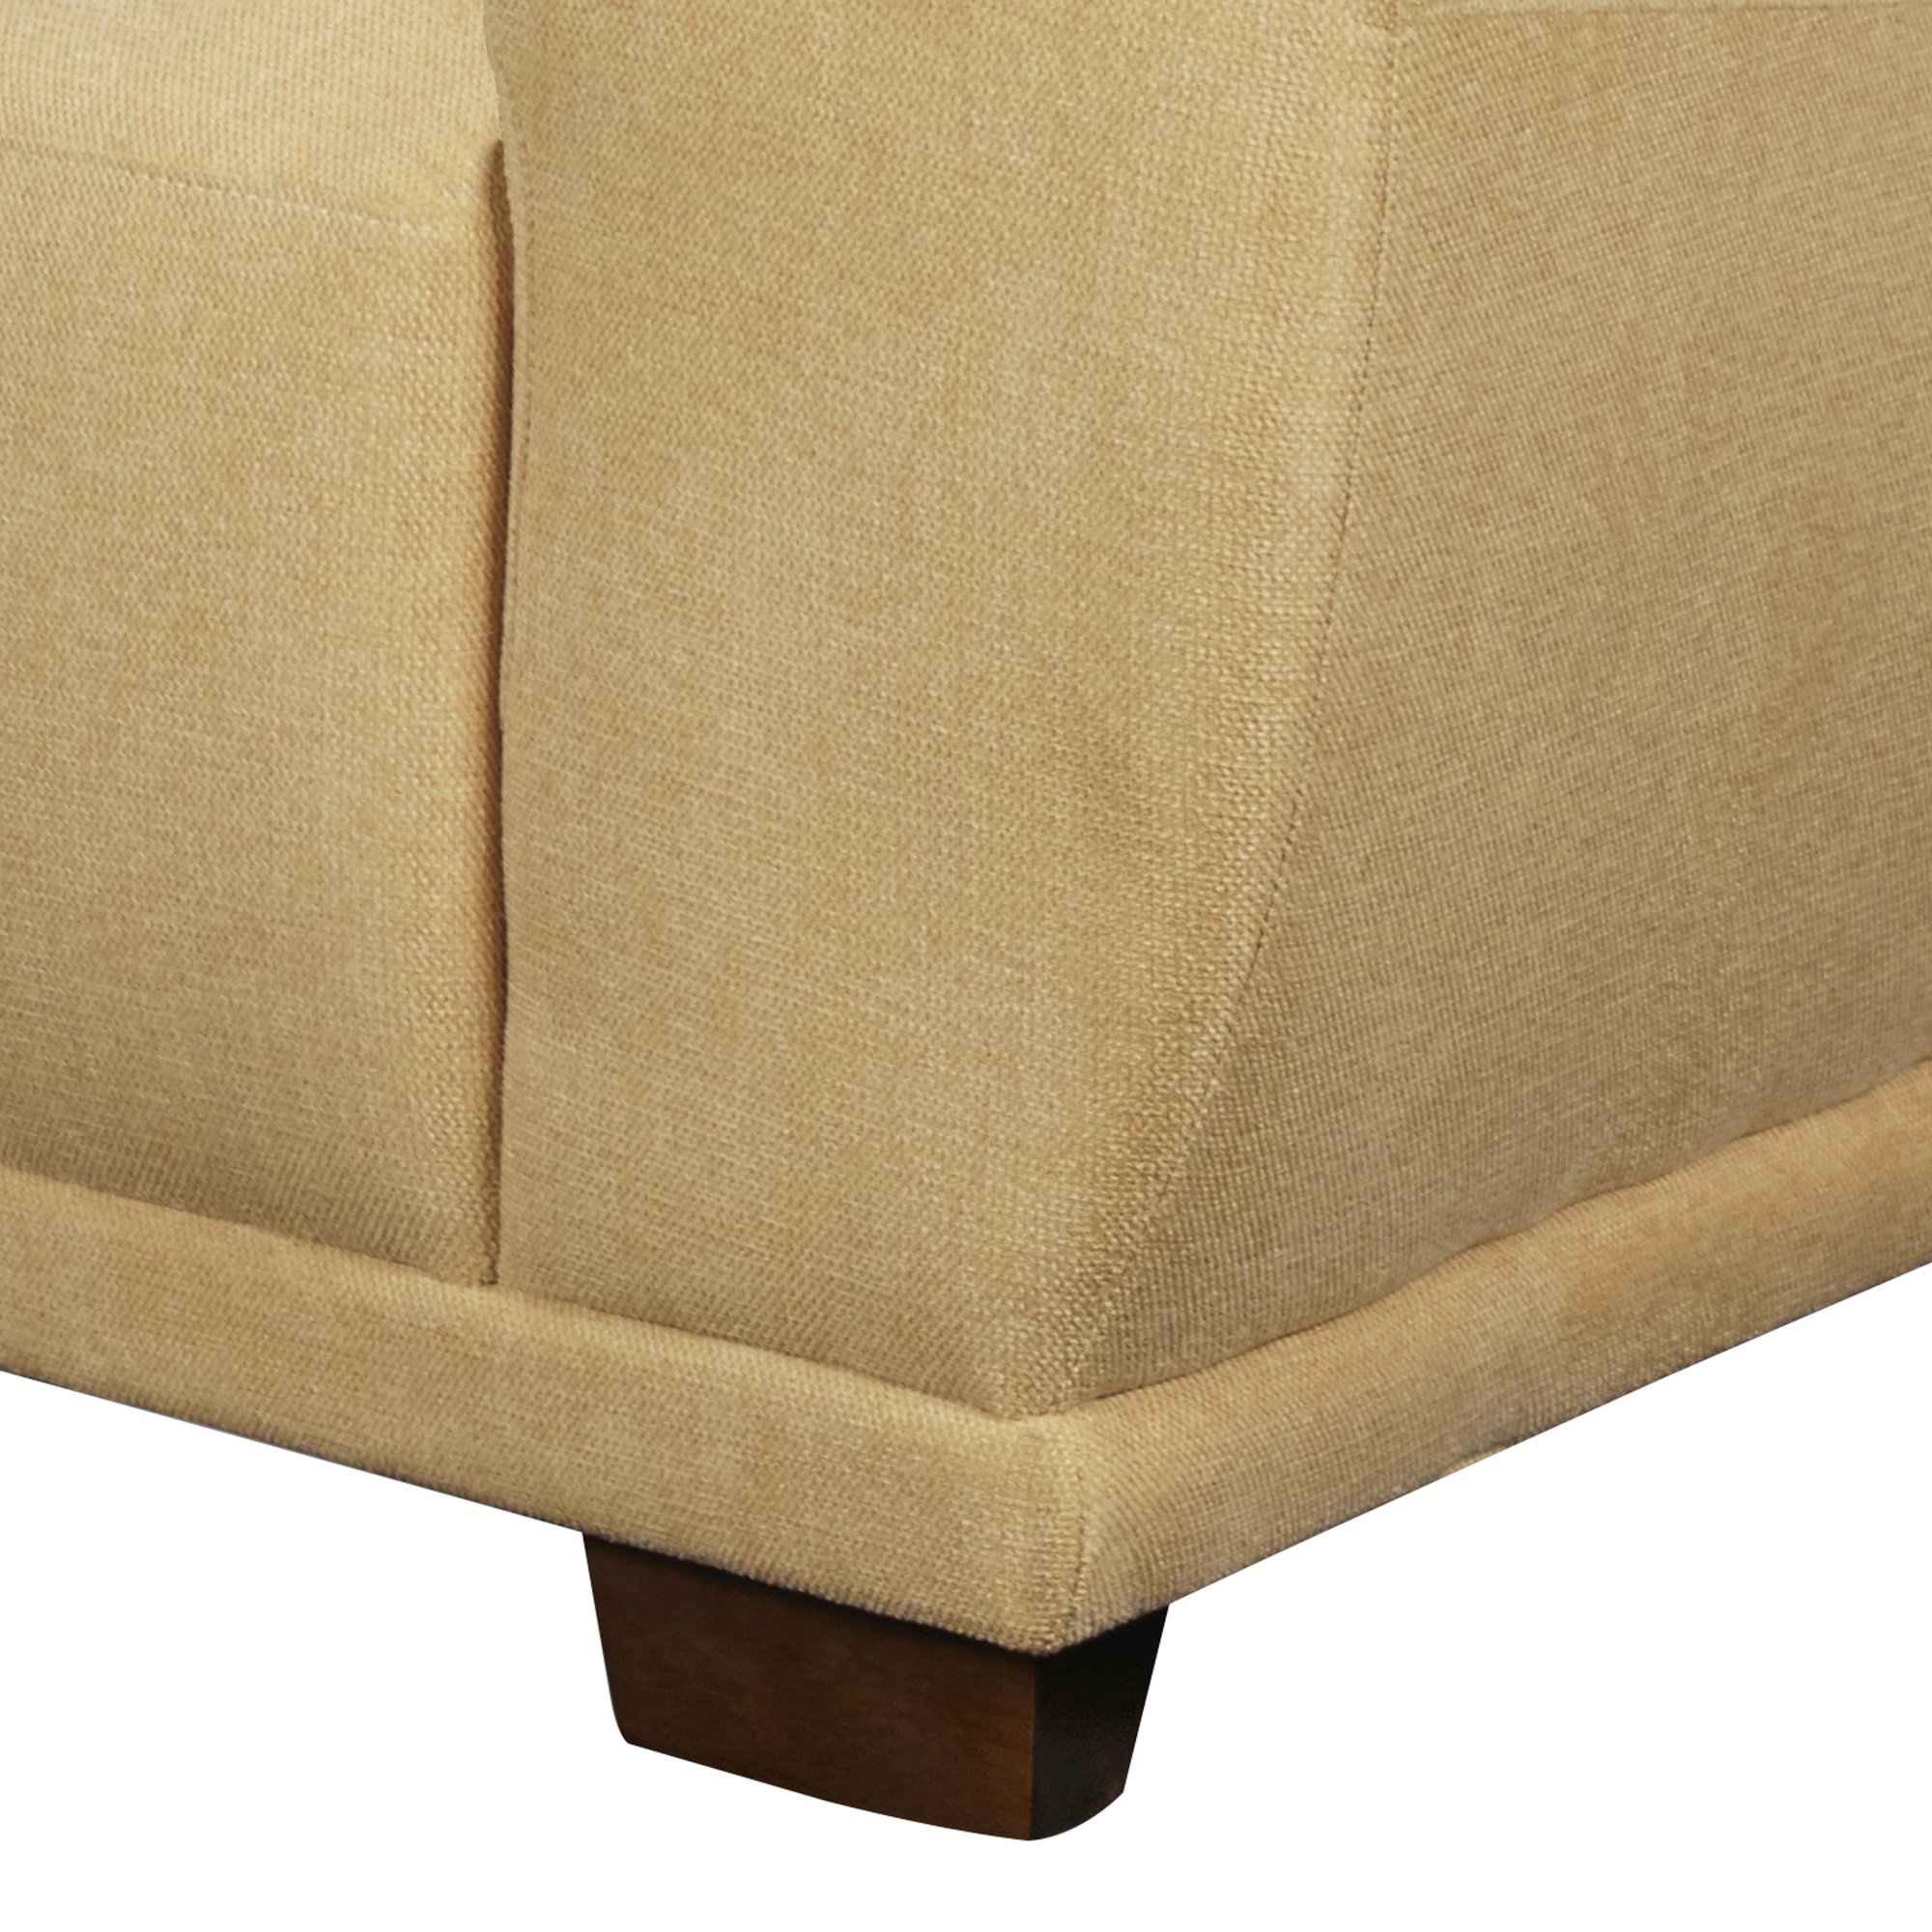 Benzara Fabric Upholstered Chair with Block Shaped Legs, Orange and Brown